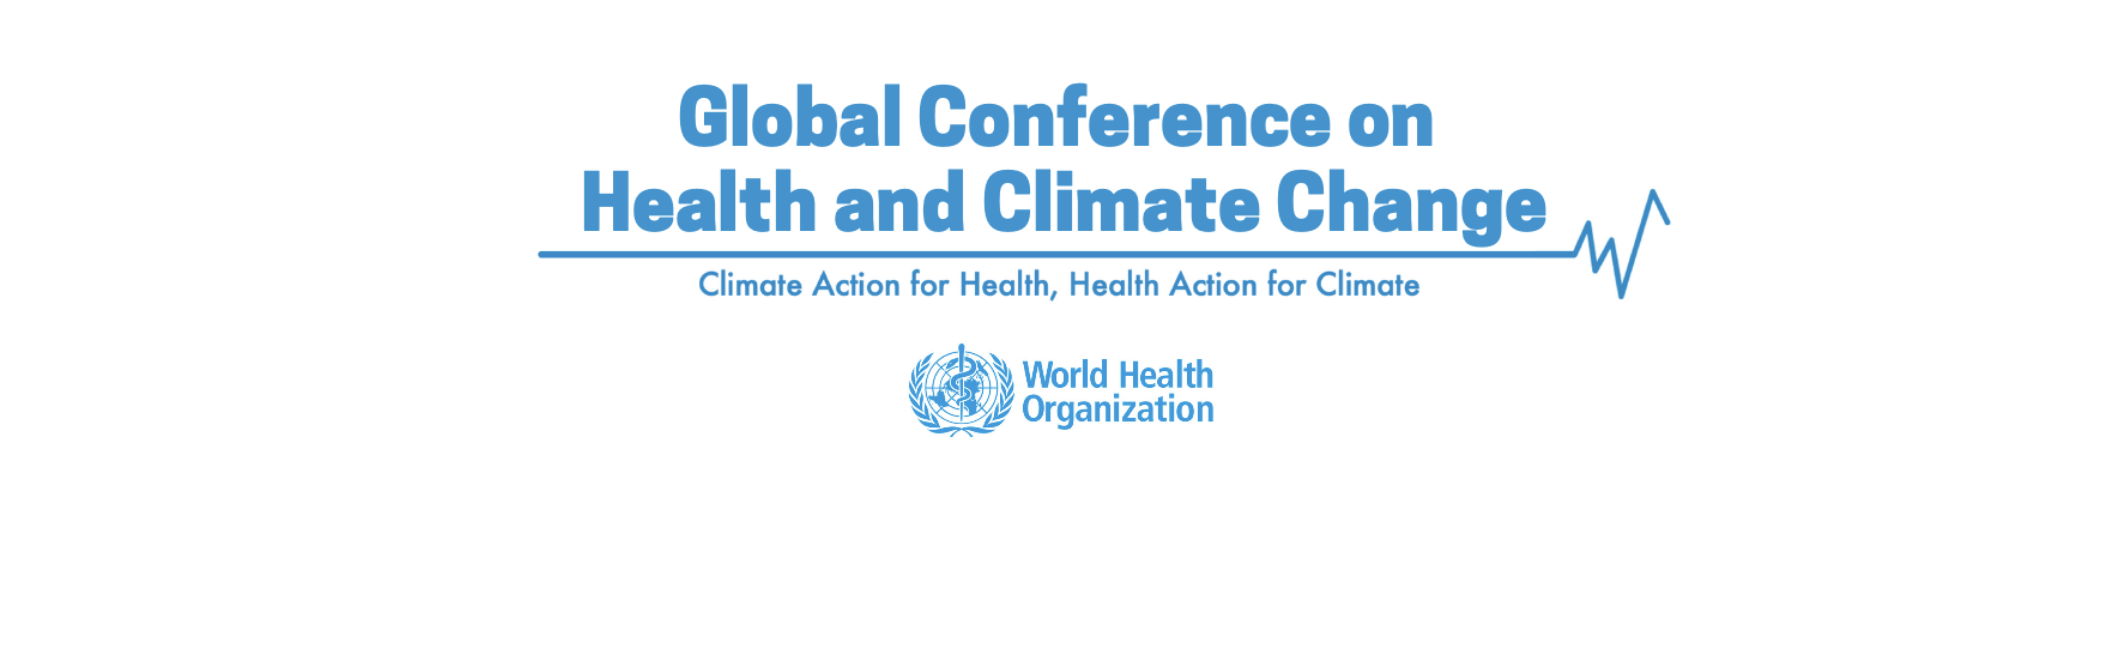 The Global Conference on Health and Climate Change